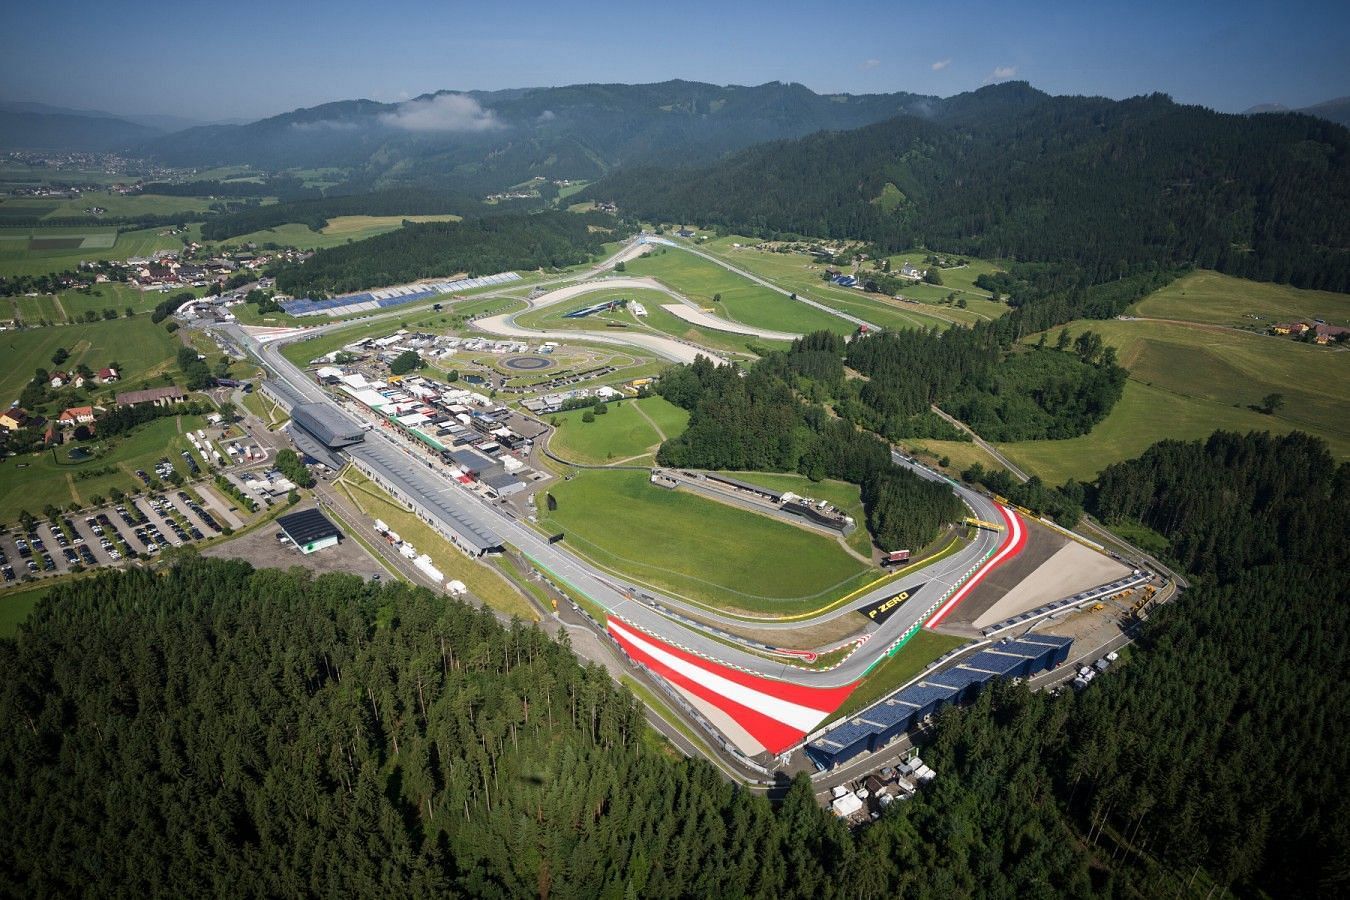 The Redbull Ring for reference (Image via Projekt Spielberg)